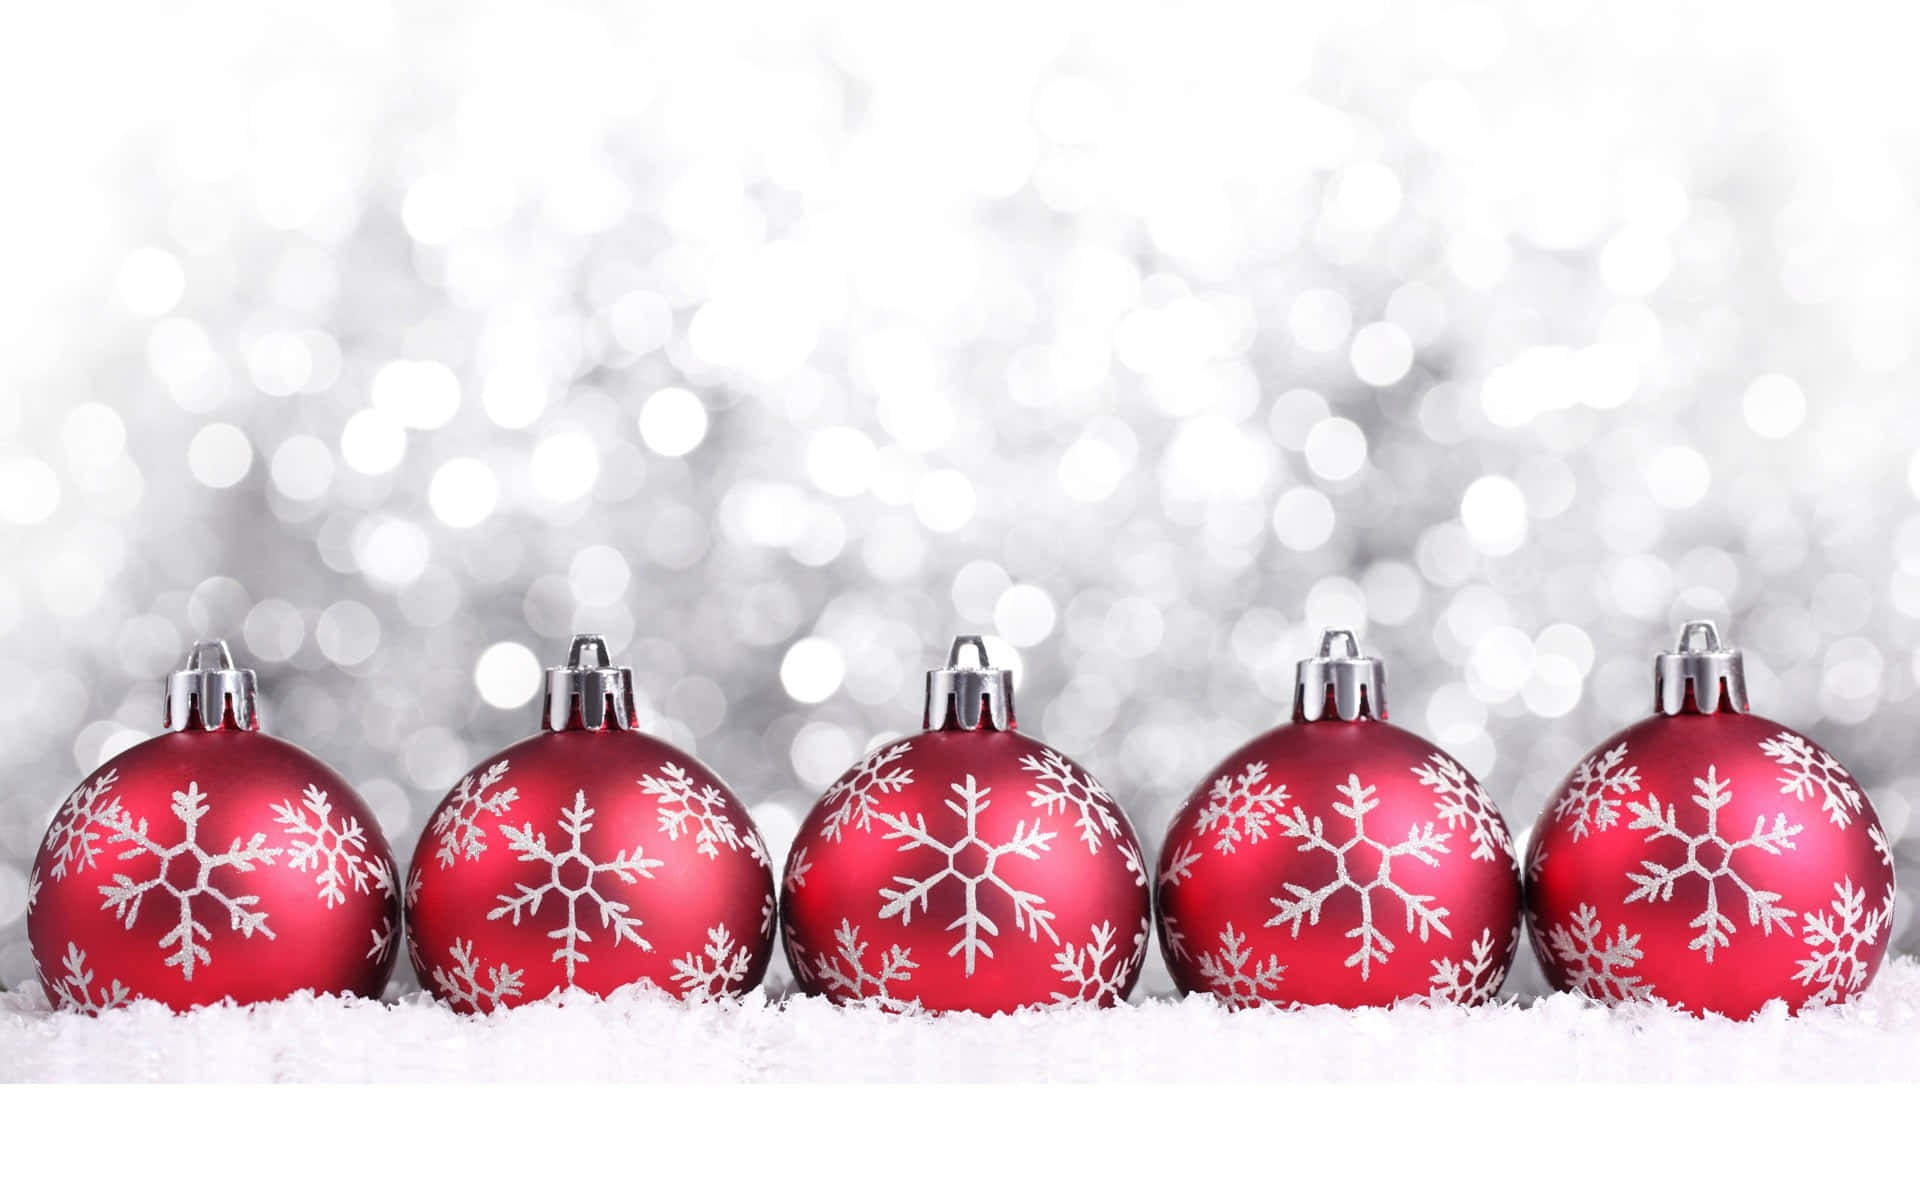 30+ Christmas Aesthetic Wallpapers : Variety Christmas Bauble